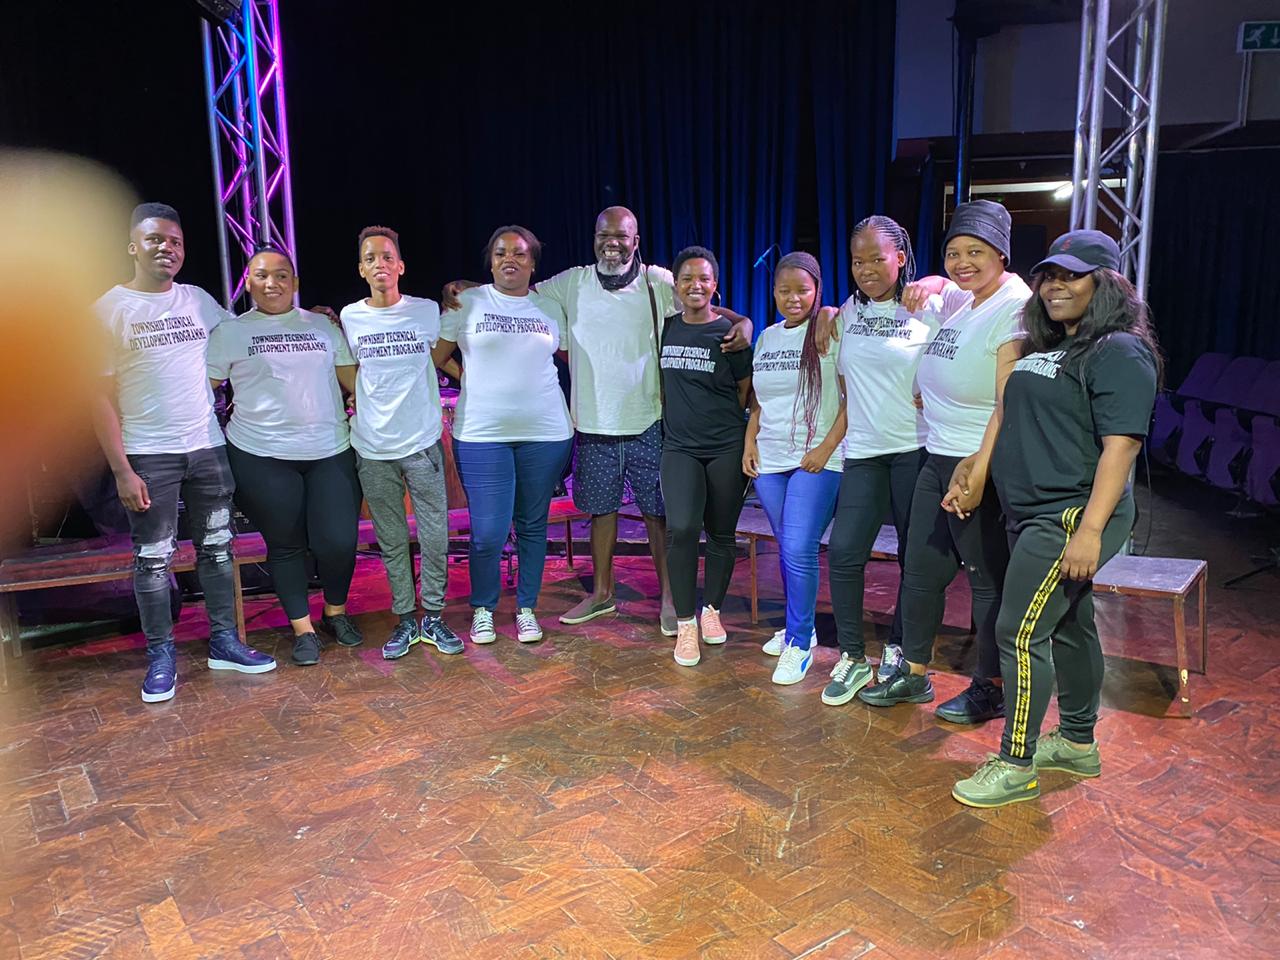 Mbuso is one of the Best artist we have in SA, singing traditional music, he also has his production company, in this picture we collaborated with him in one of his shows to inspire students even more, they got a privileged to set up for Mbuso's show and run rehearsals till the final dress rehearsal.